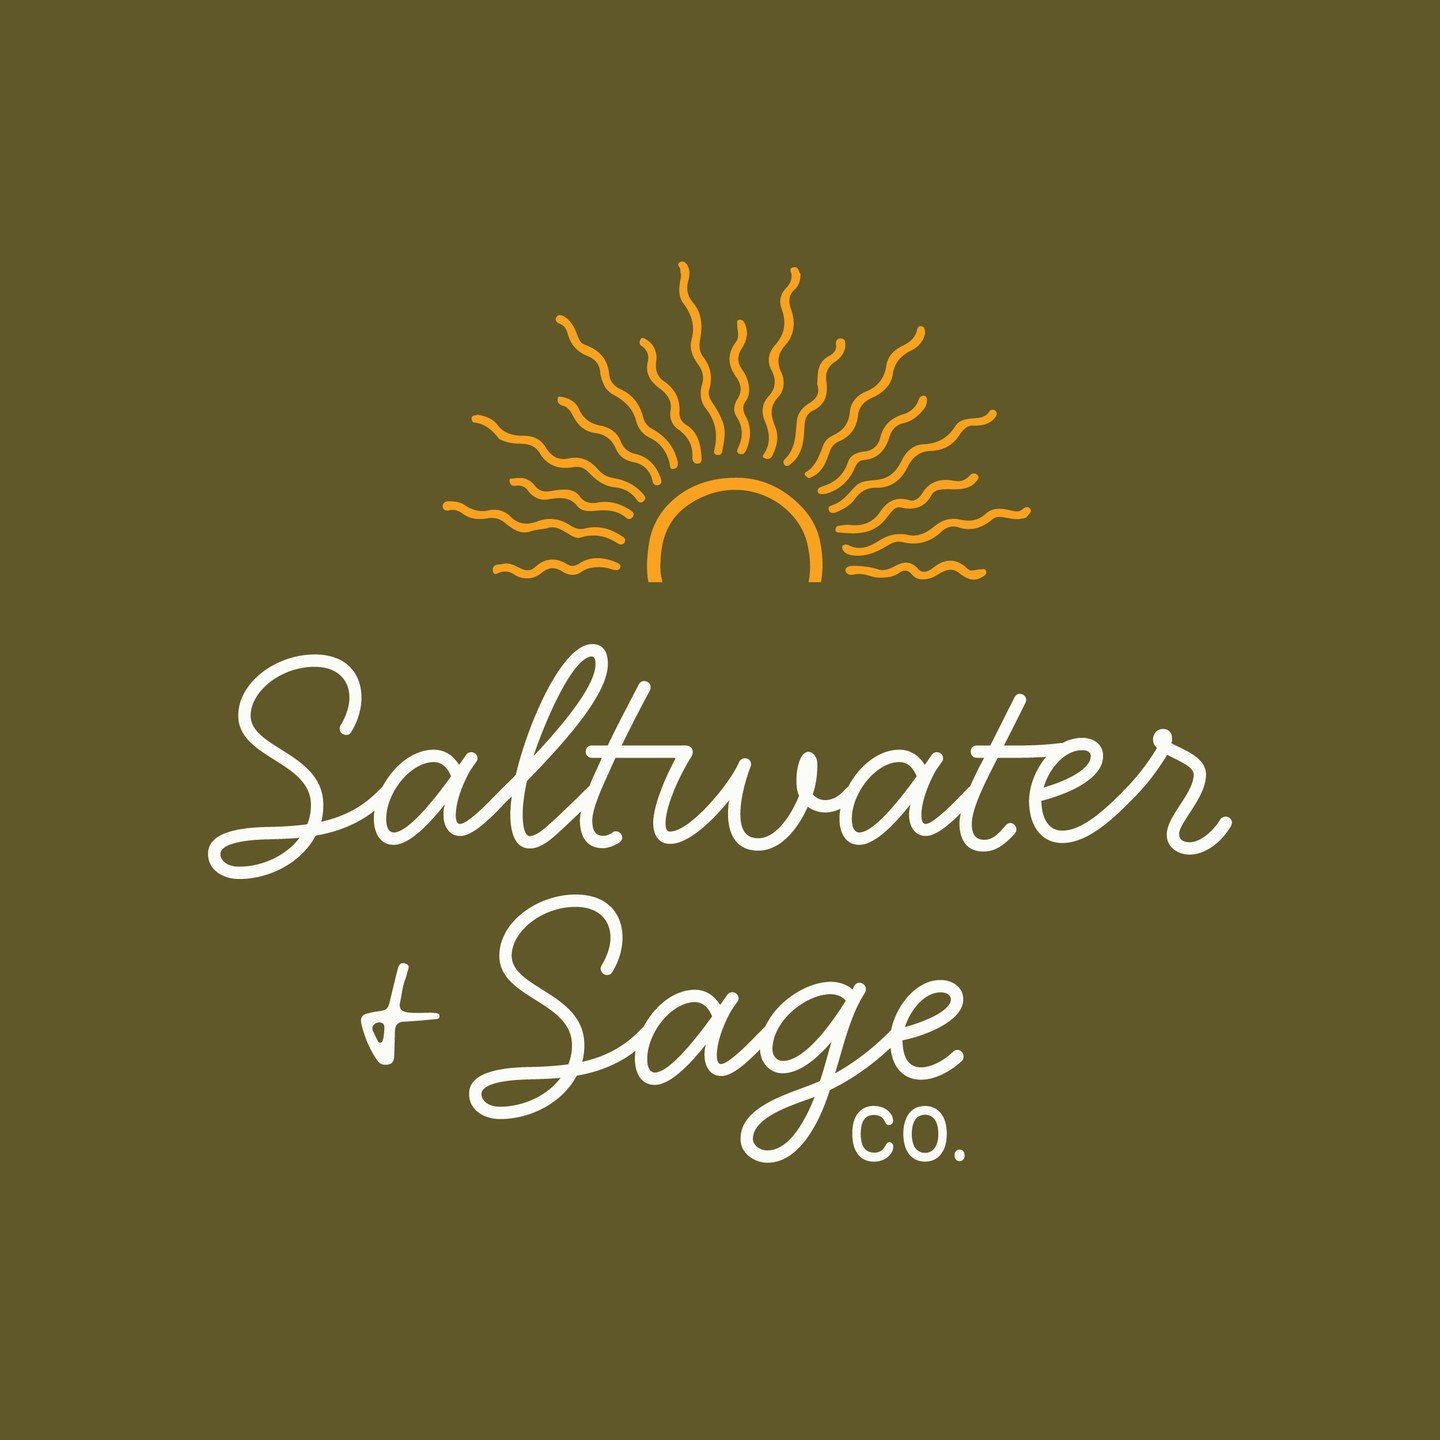 Up next is the logo and visual brand for Saltwater + Sage Co ☀️! Alex makes beautiful, modern drop earrings inspired by nature and our designer Isabel created a brand concept that captured the energy of the outdoors along with the fun, feminine, and 